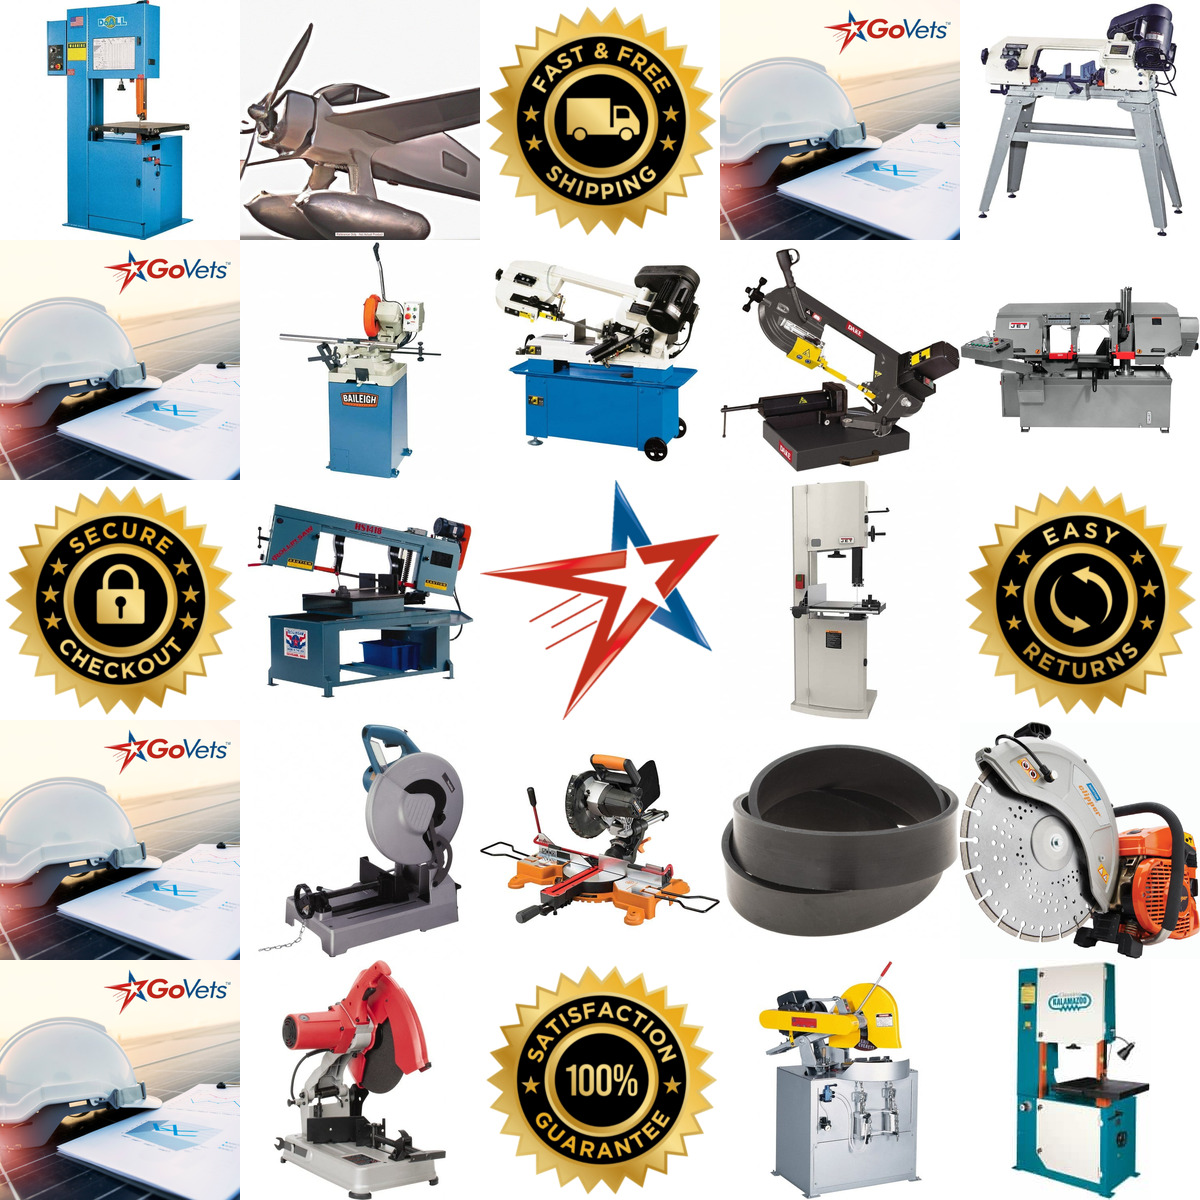 A selection of Saw Machines products on GoVets